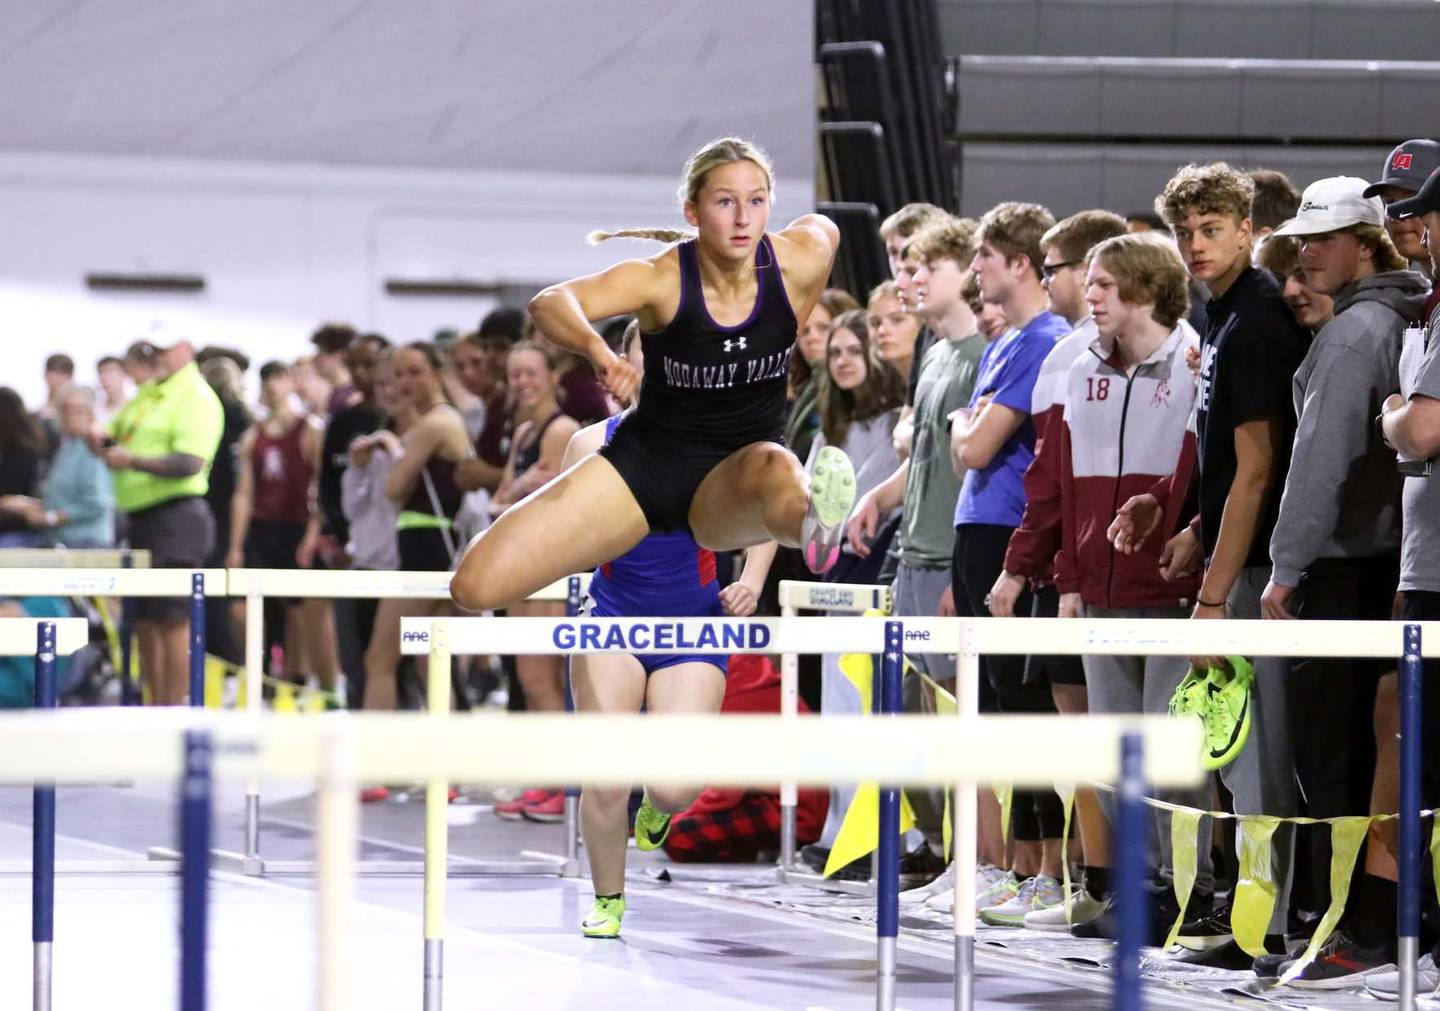 Annika Nelson of Nodaway Valley clears a hurdle in a first-place time of :09.06.